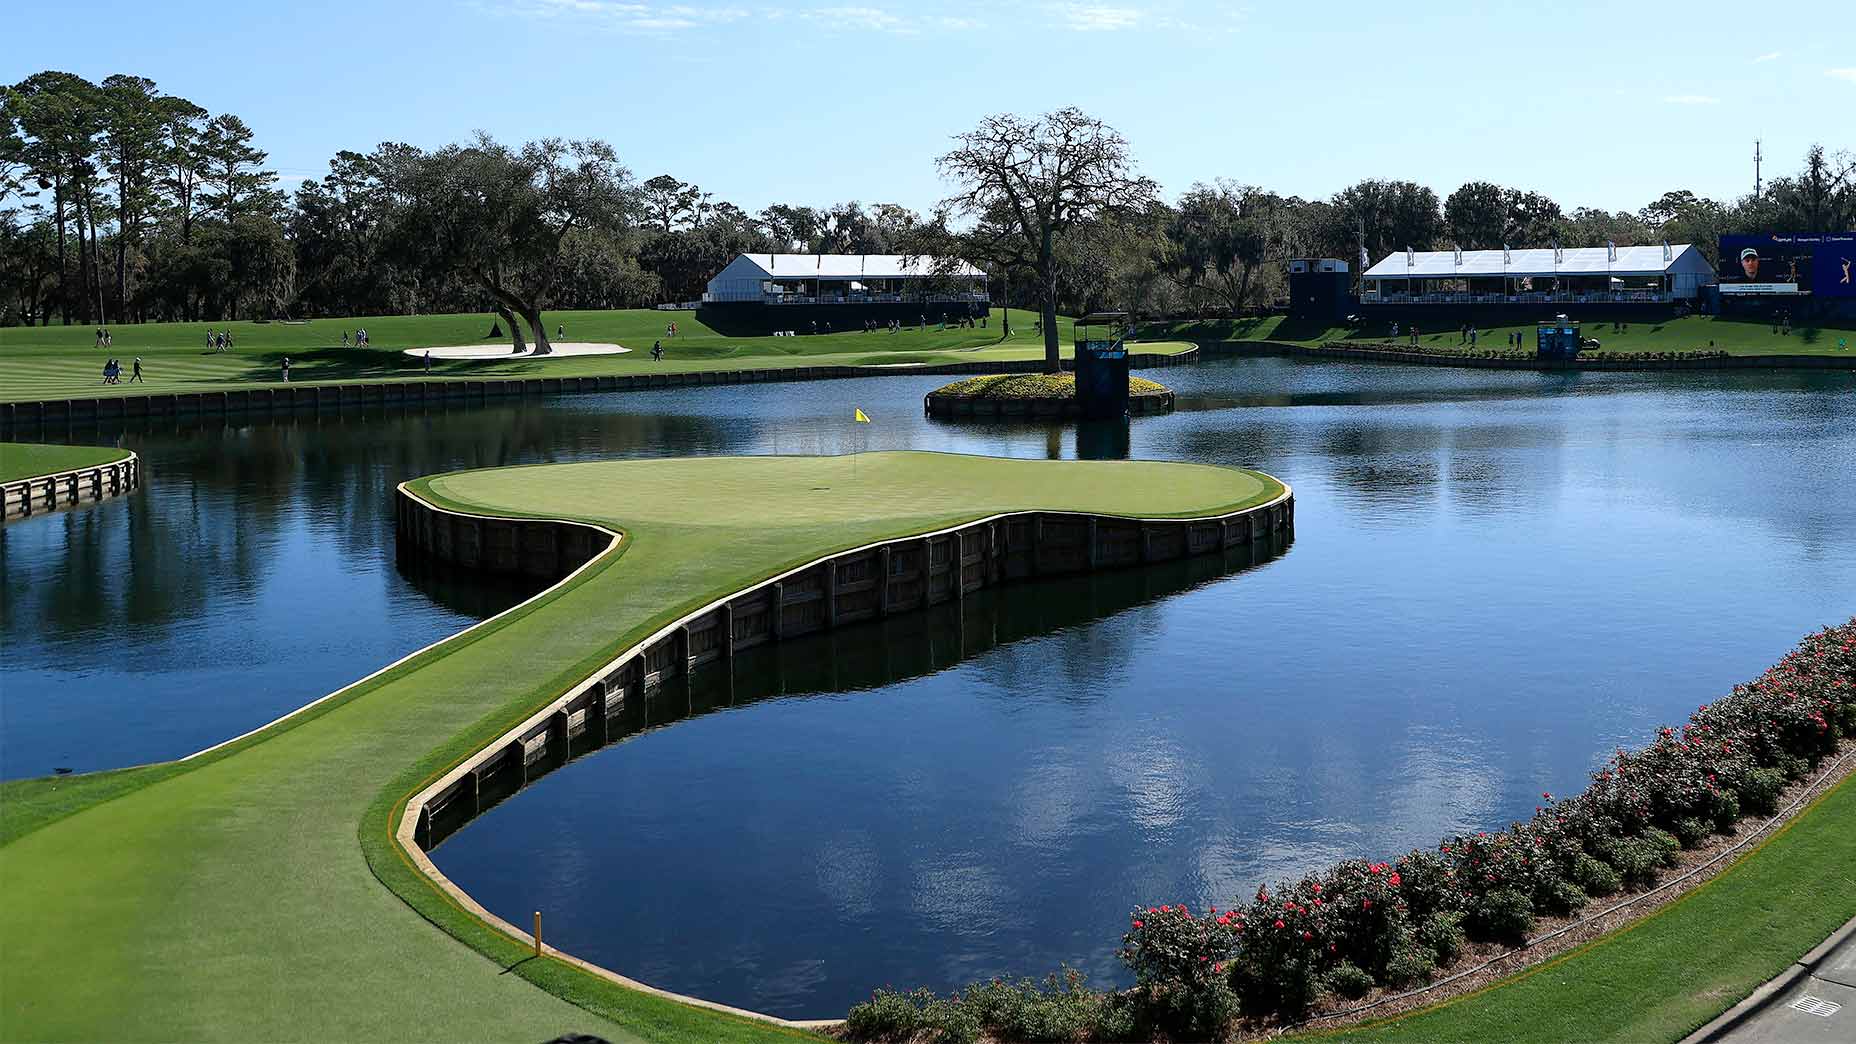 Players Championship purse 2019: Winner's payout is $2.25 million in prize  money - SBNation.com